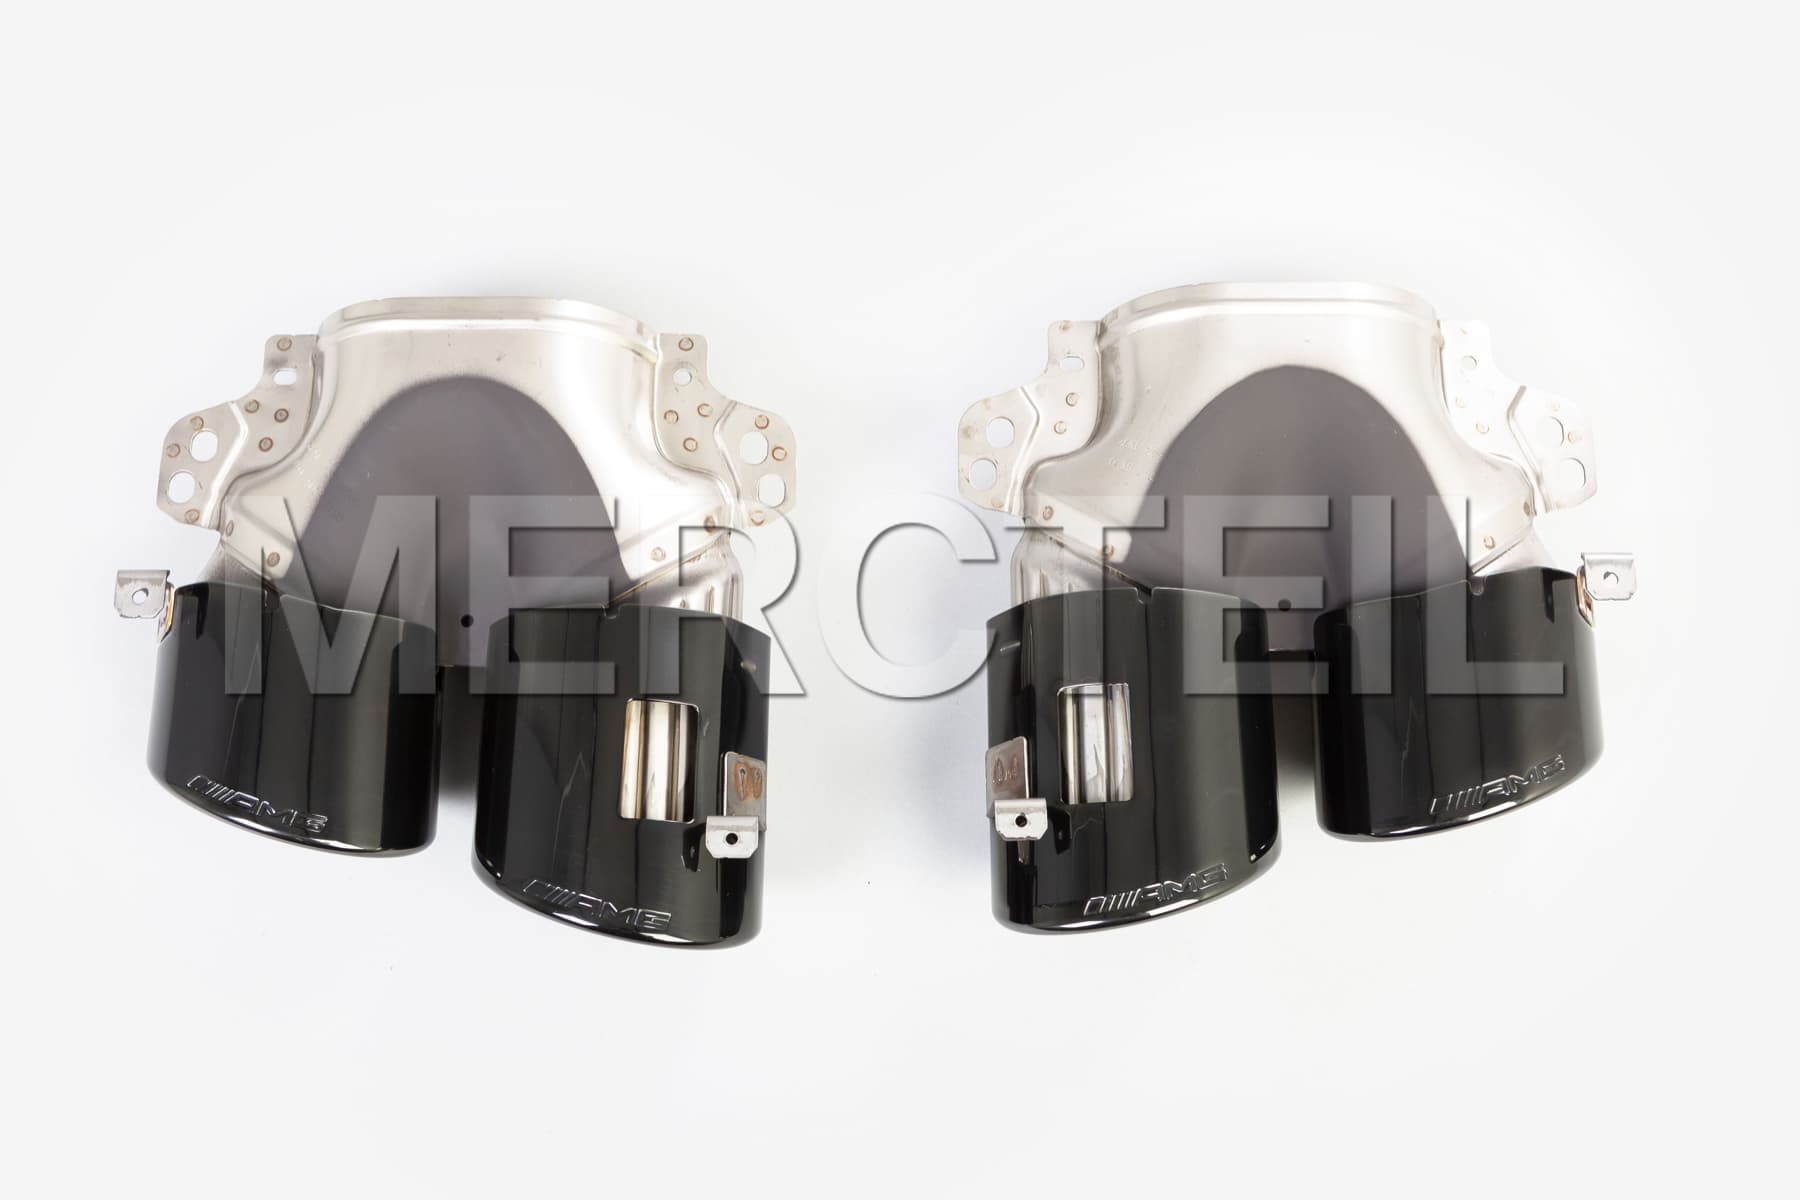 AMG 45 Black Tail Pipes W177 C118 H247 Genuine Mercedes AMG (part number: A0004901600)